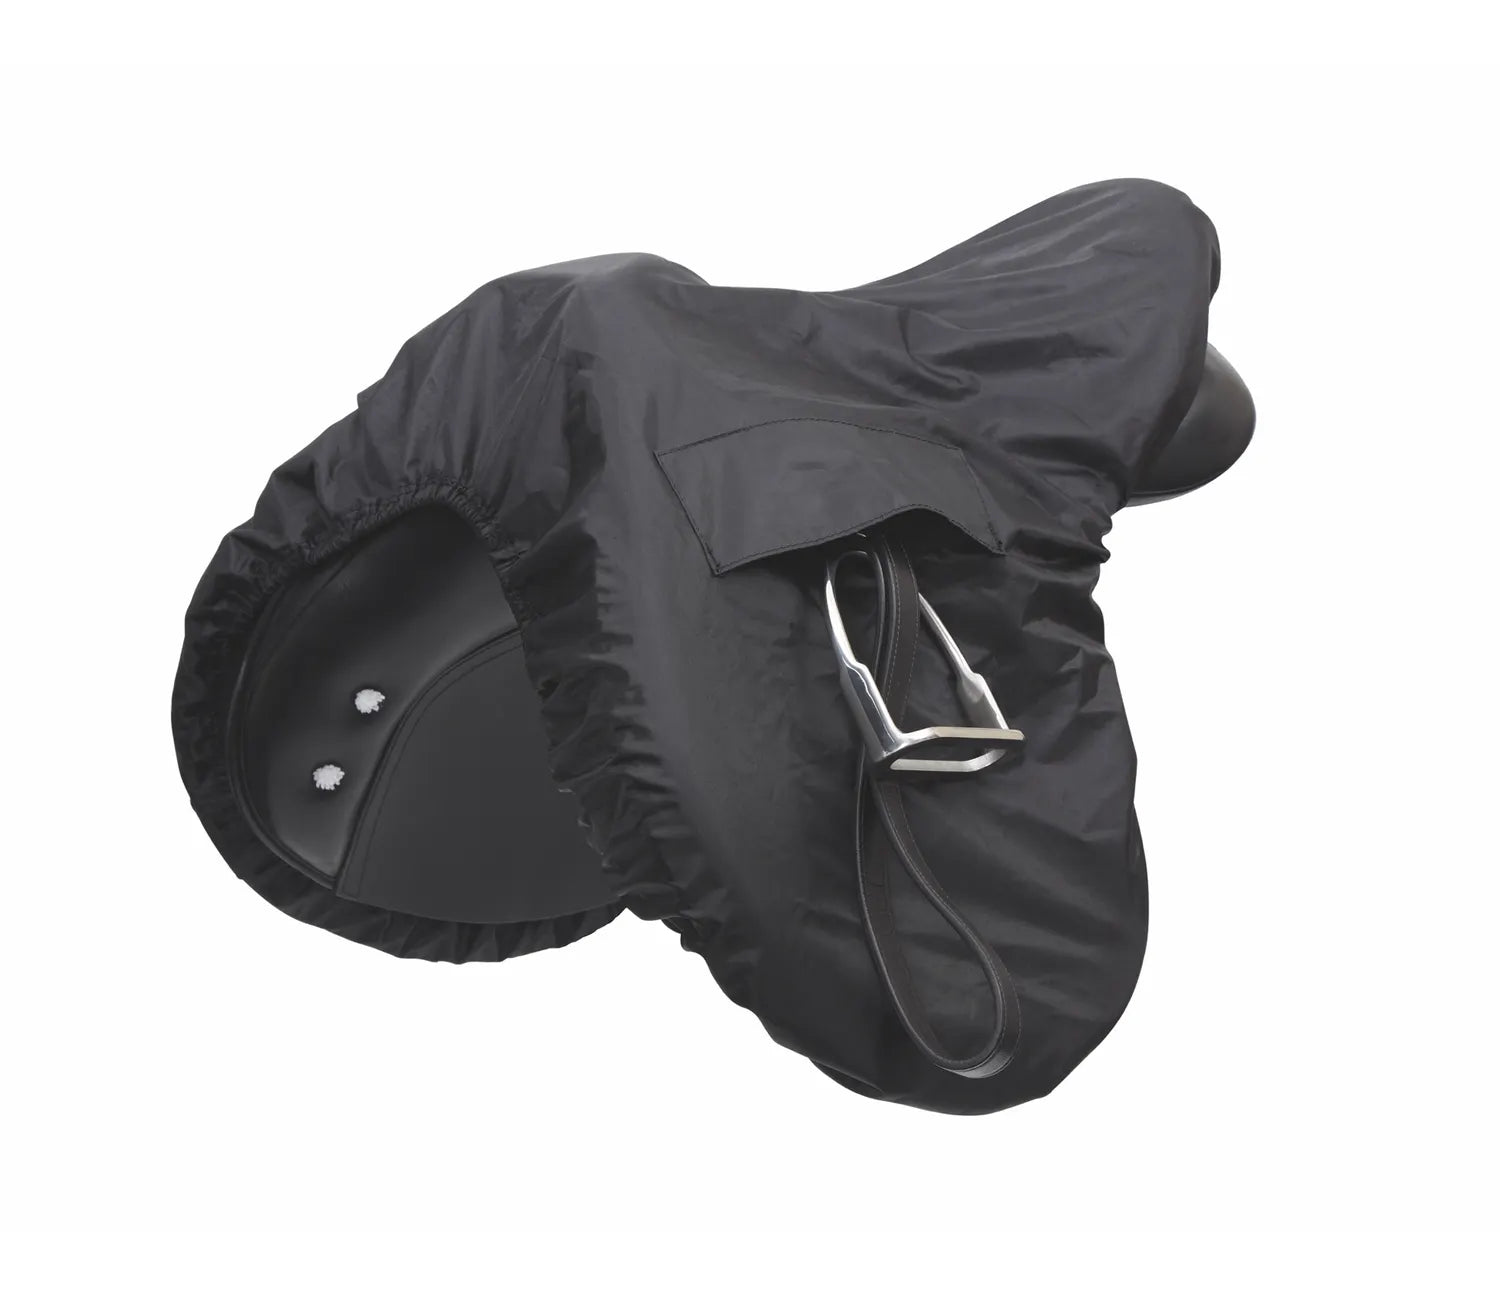 ARMA Waterproof Ride-on Saddle Cover Black